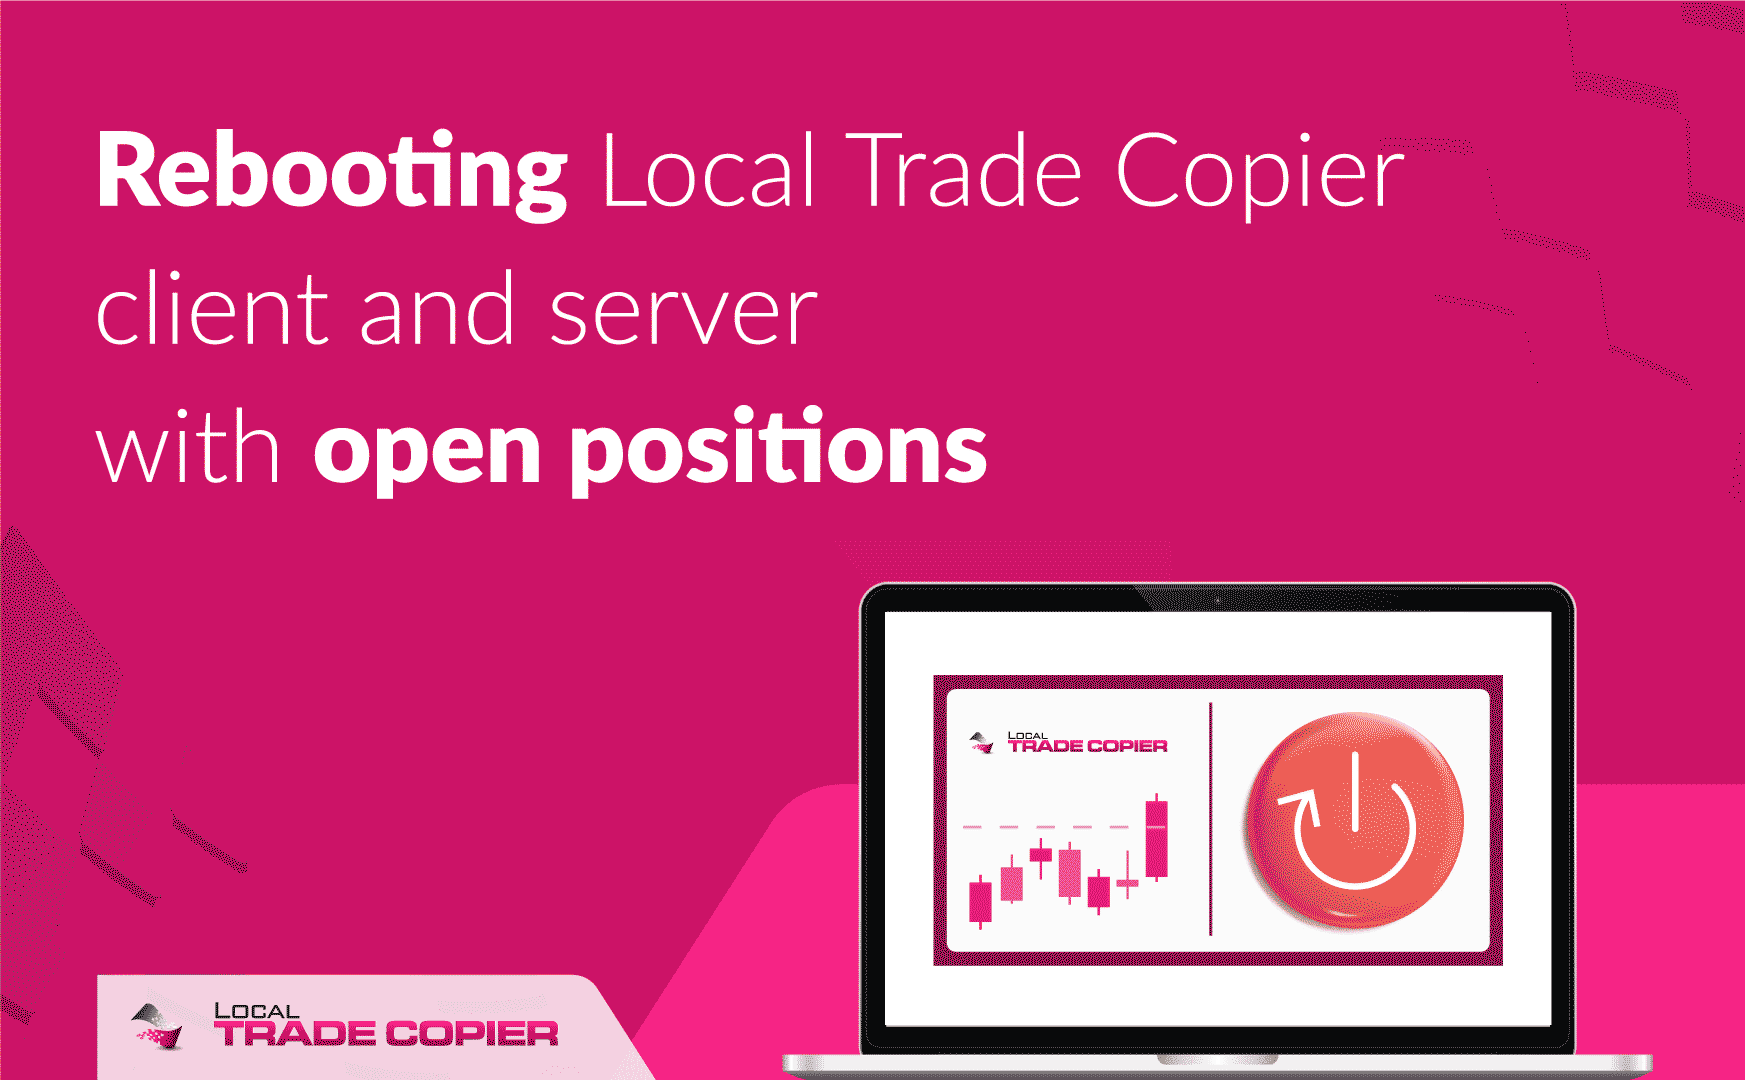 Local-Trade-Copier-Tutorials-rebooting-local-trade-copier-client-and-server-with-open-positions-1745x1080